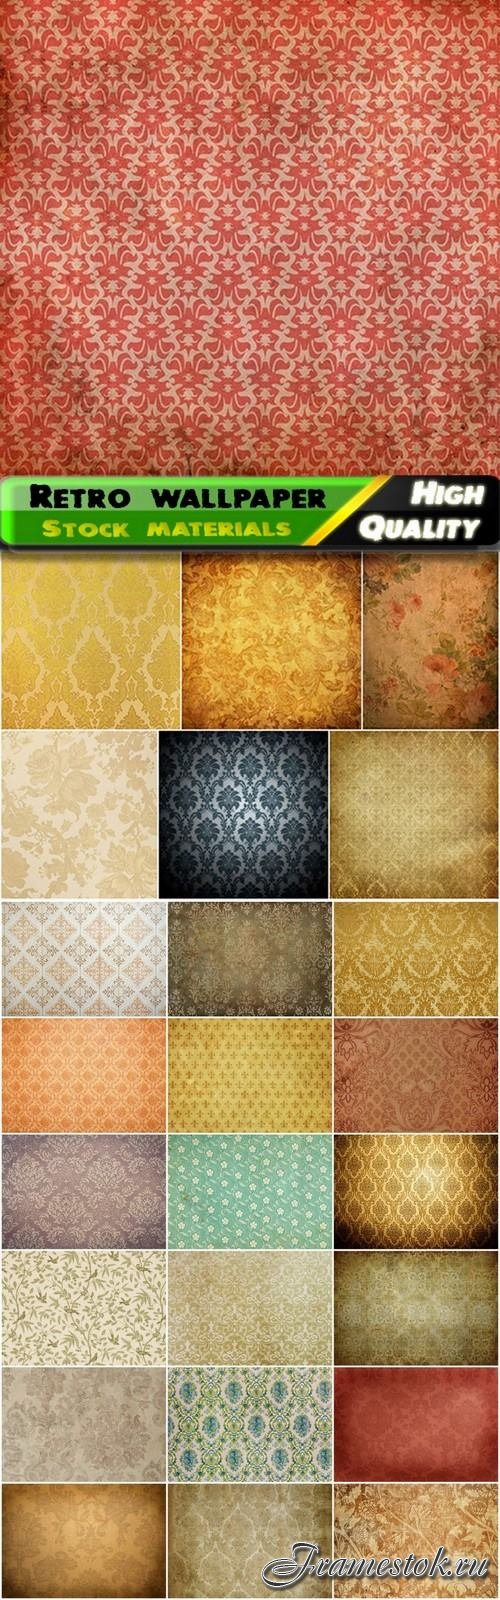 Vintage and retro wallpaper textures - 25 HQ Jpg